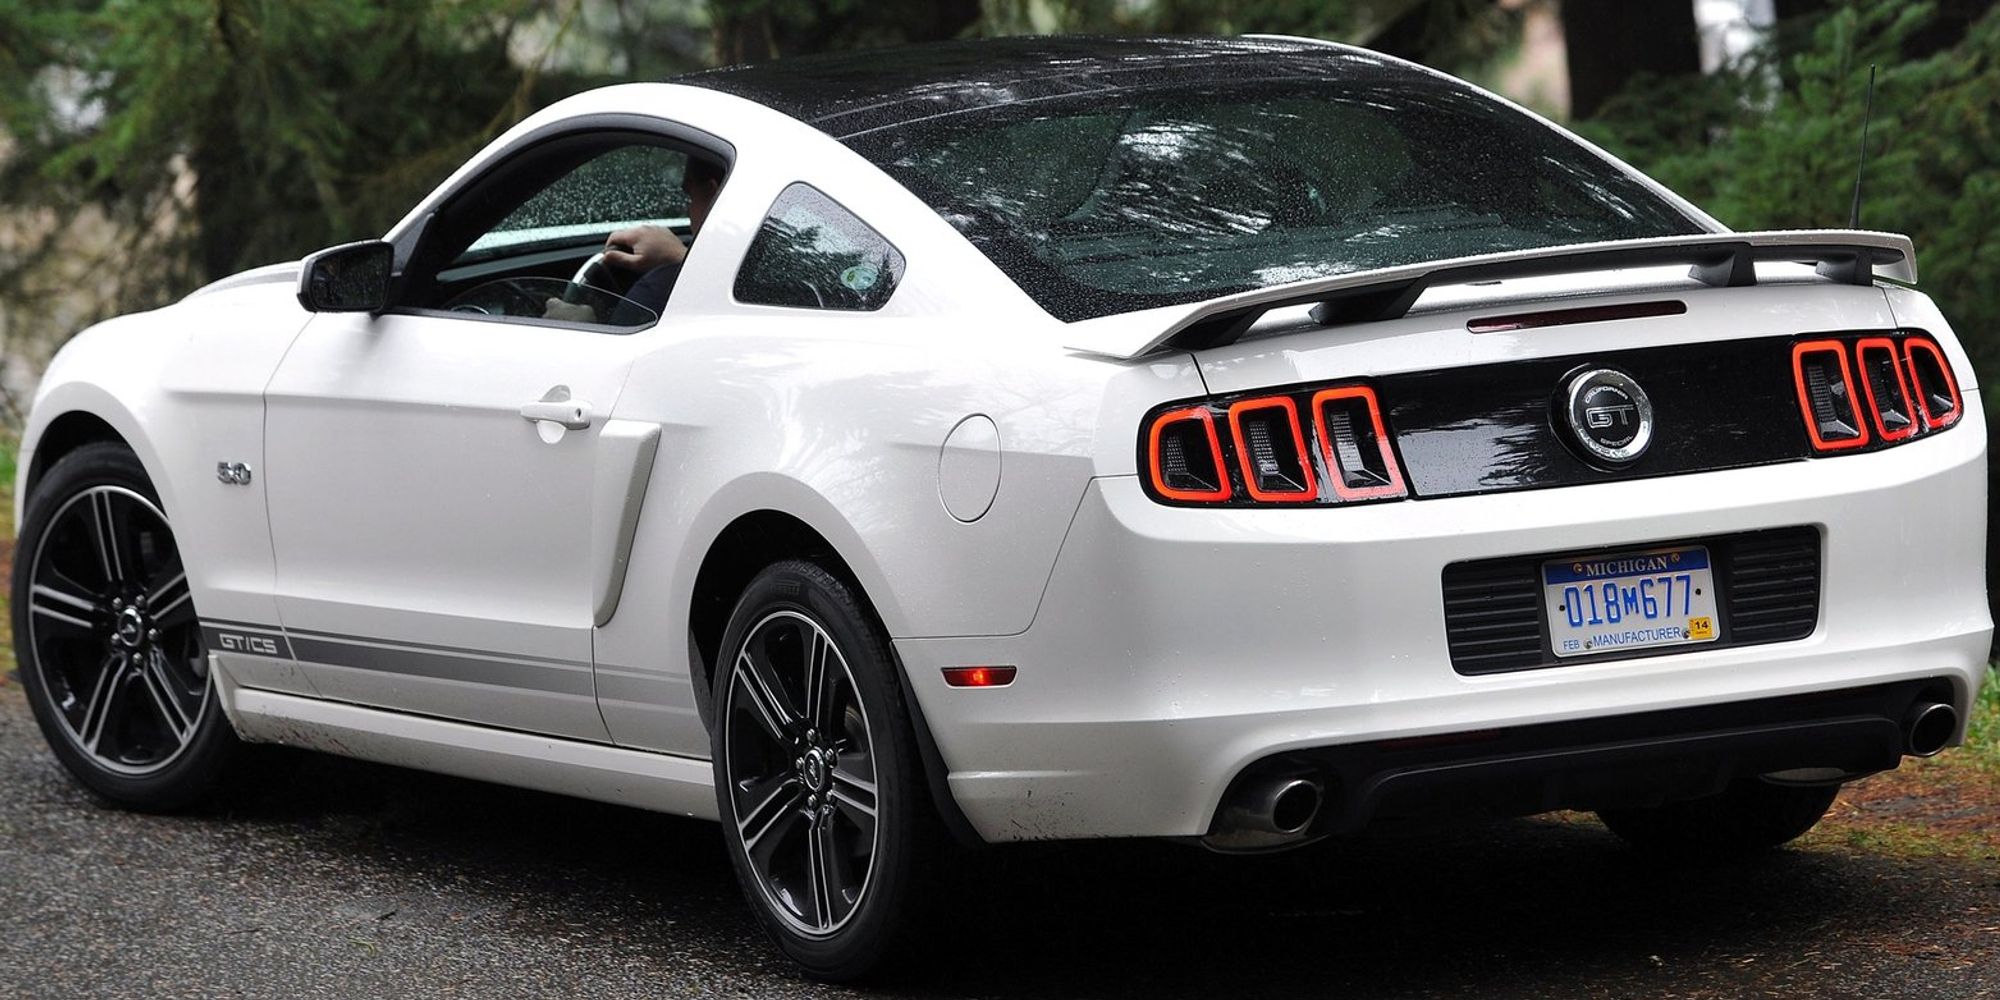 The rear of a white S197-II Mustang